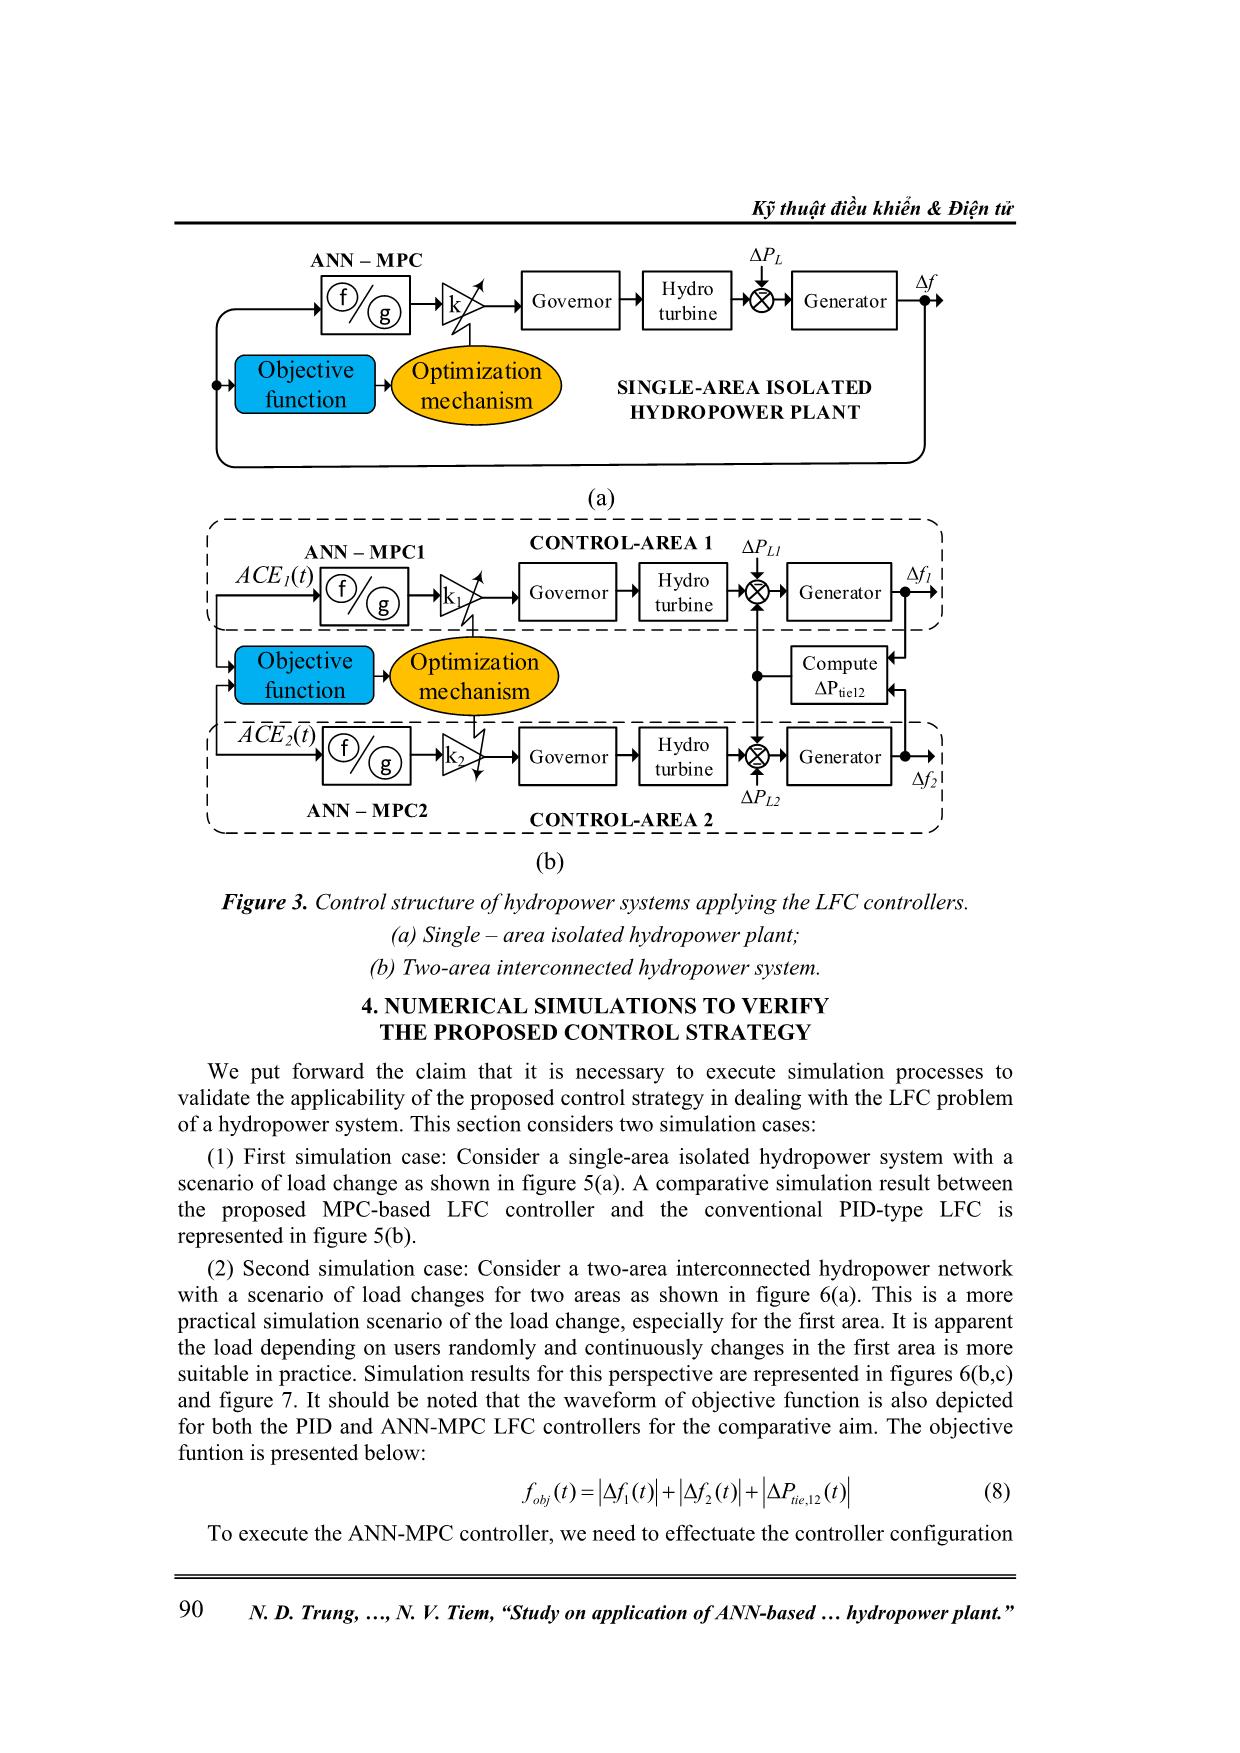 Study on application of ann - based mpc controllers for load-frequency control of an interconnected hydropower plant trang 5